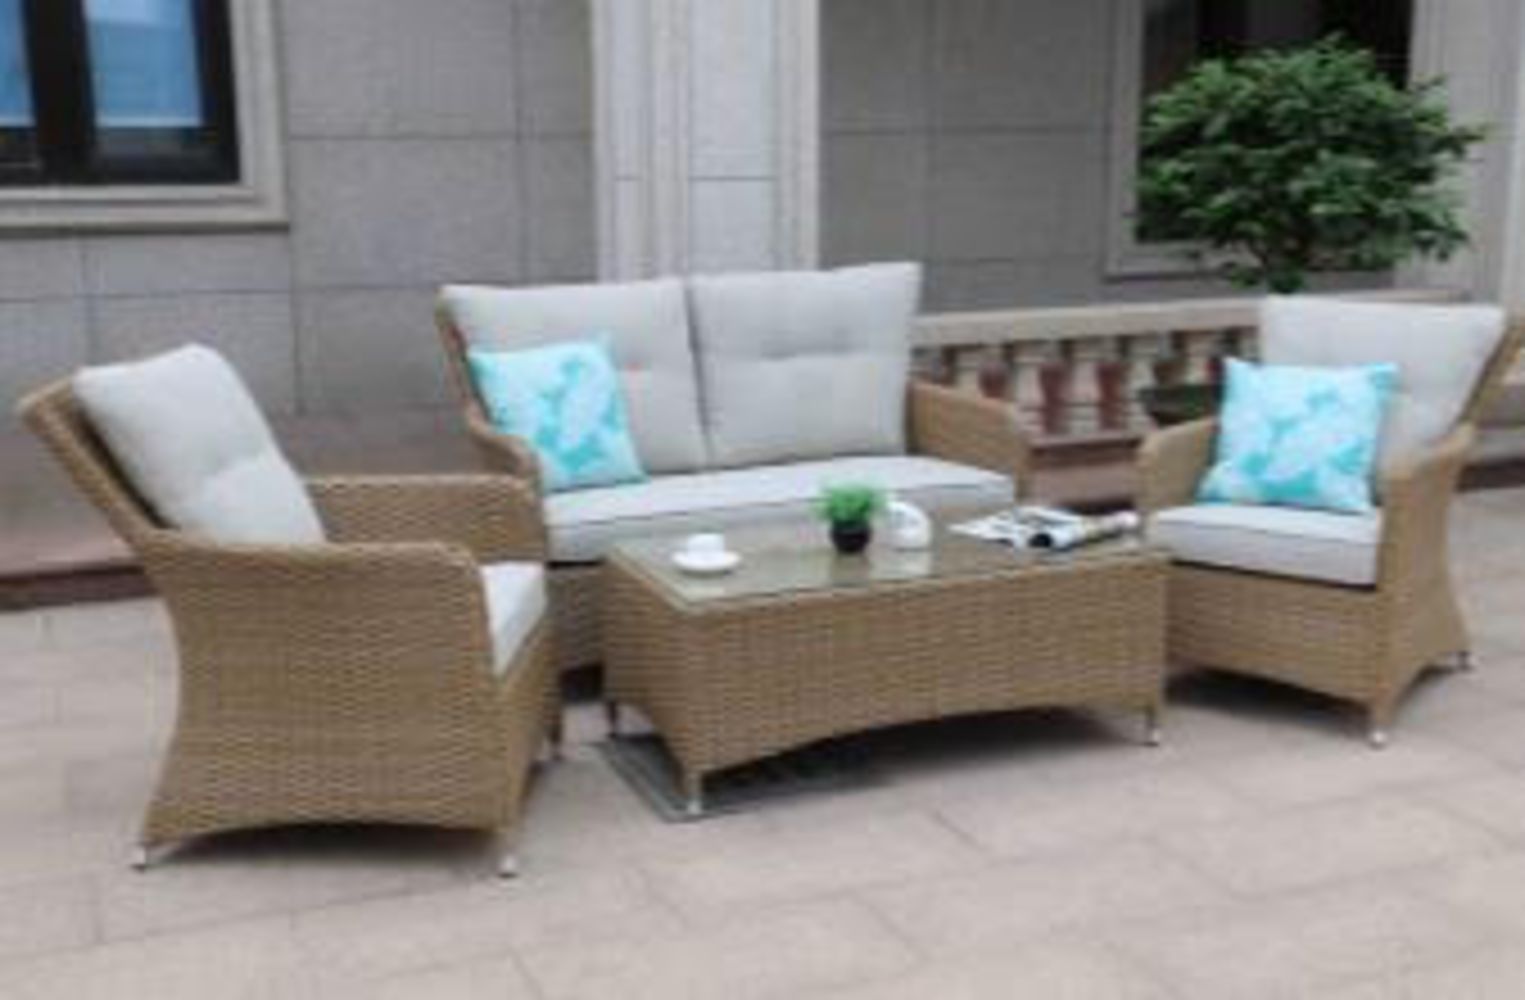 Brand New Exclusive Luxury Rattan Garden Furniture And Accessories - Last Remaining Stock Of This Season!